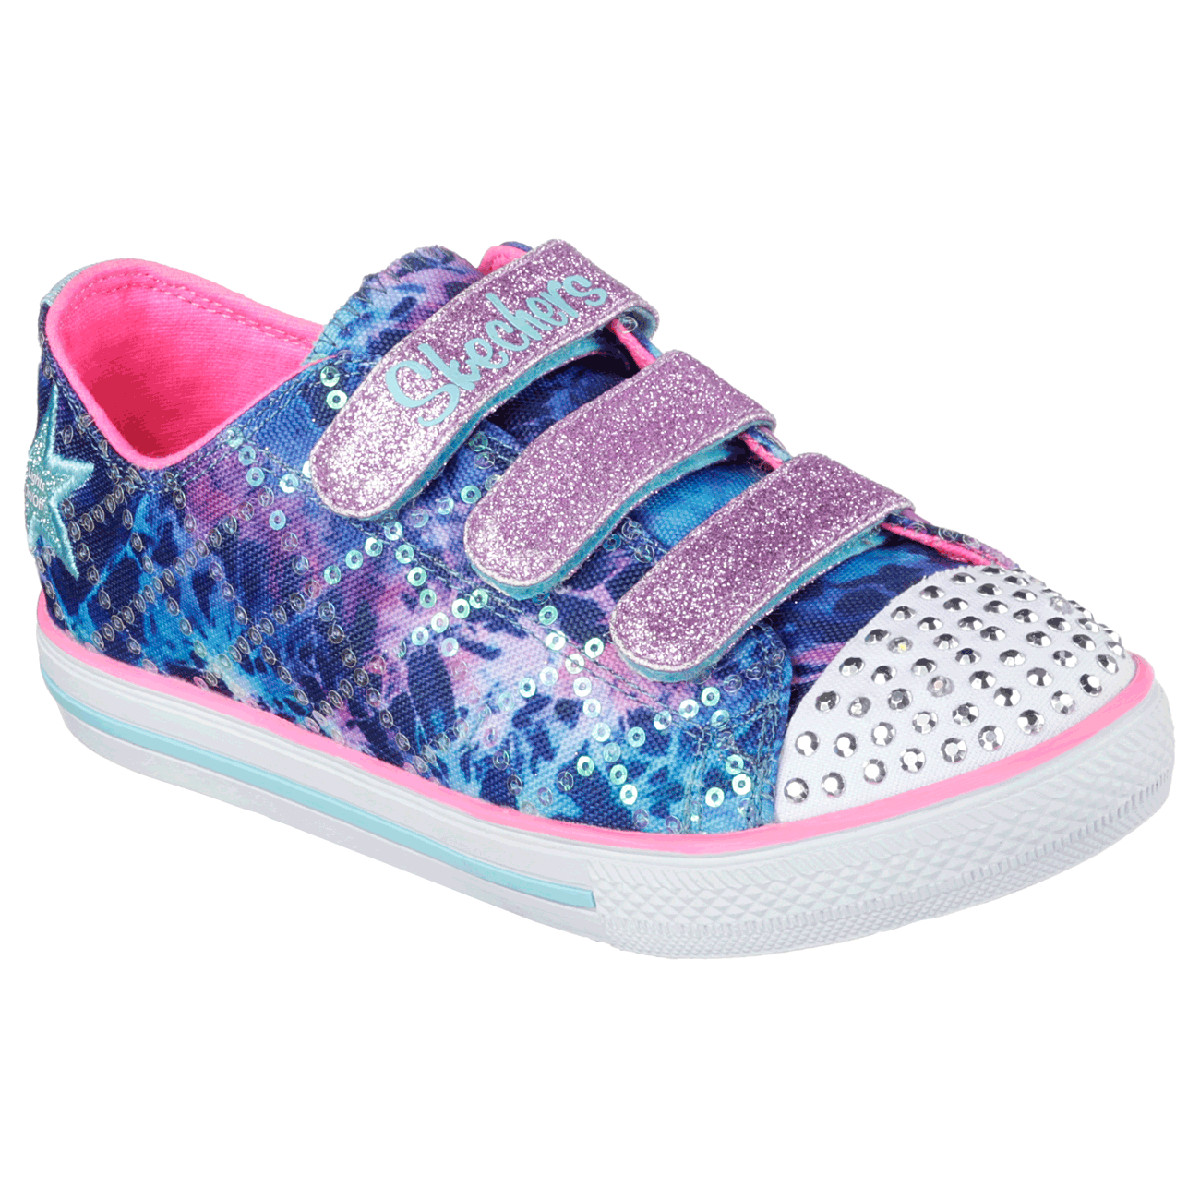 twinkle toes shoes australia